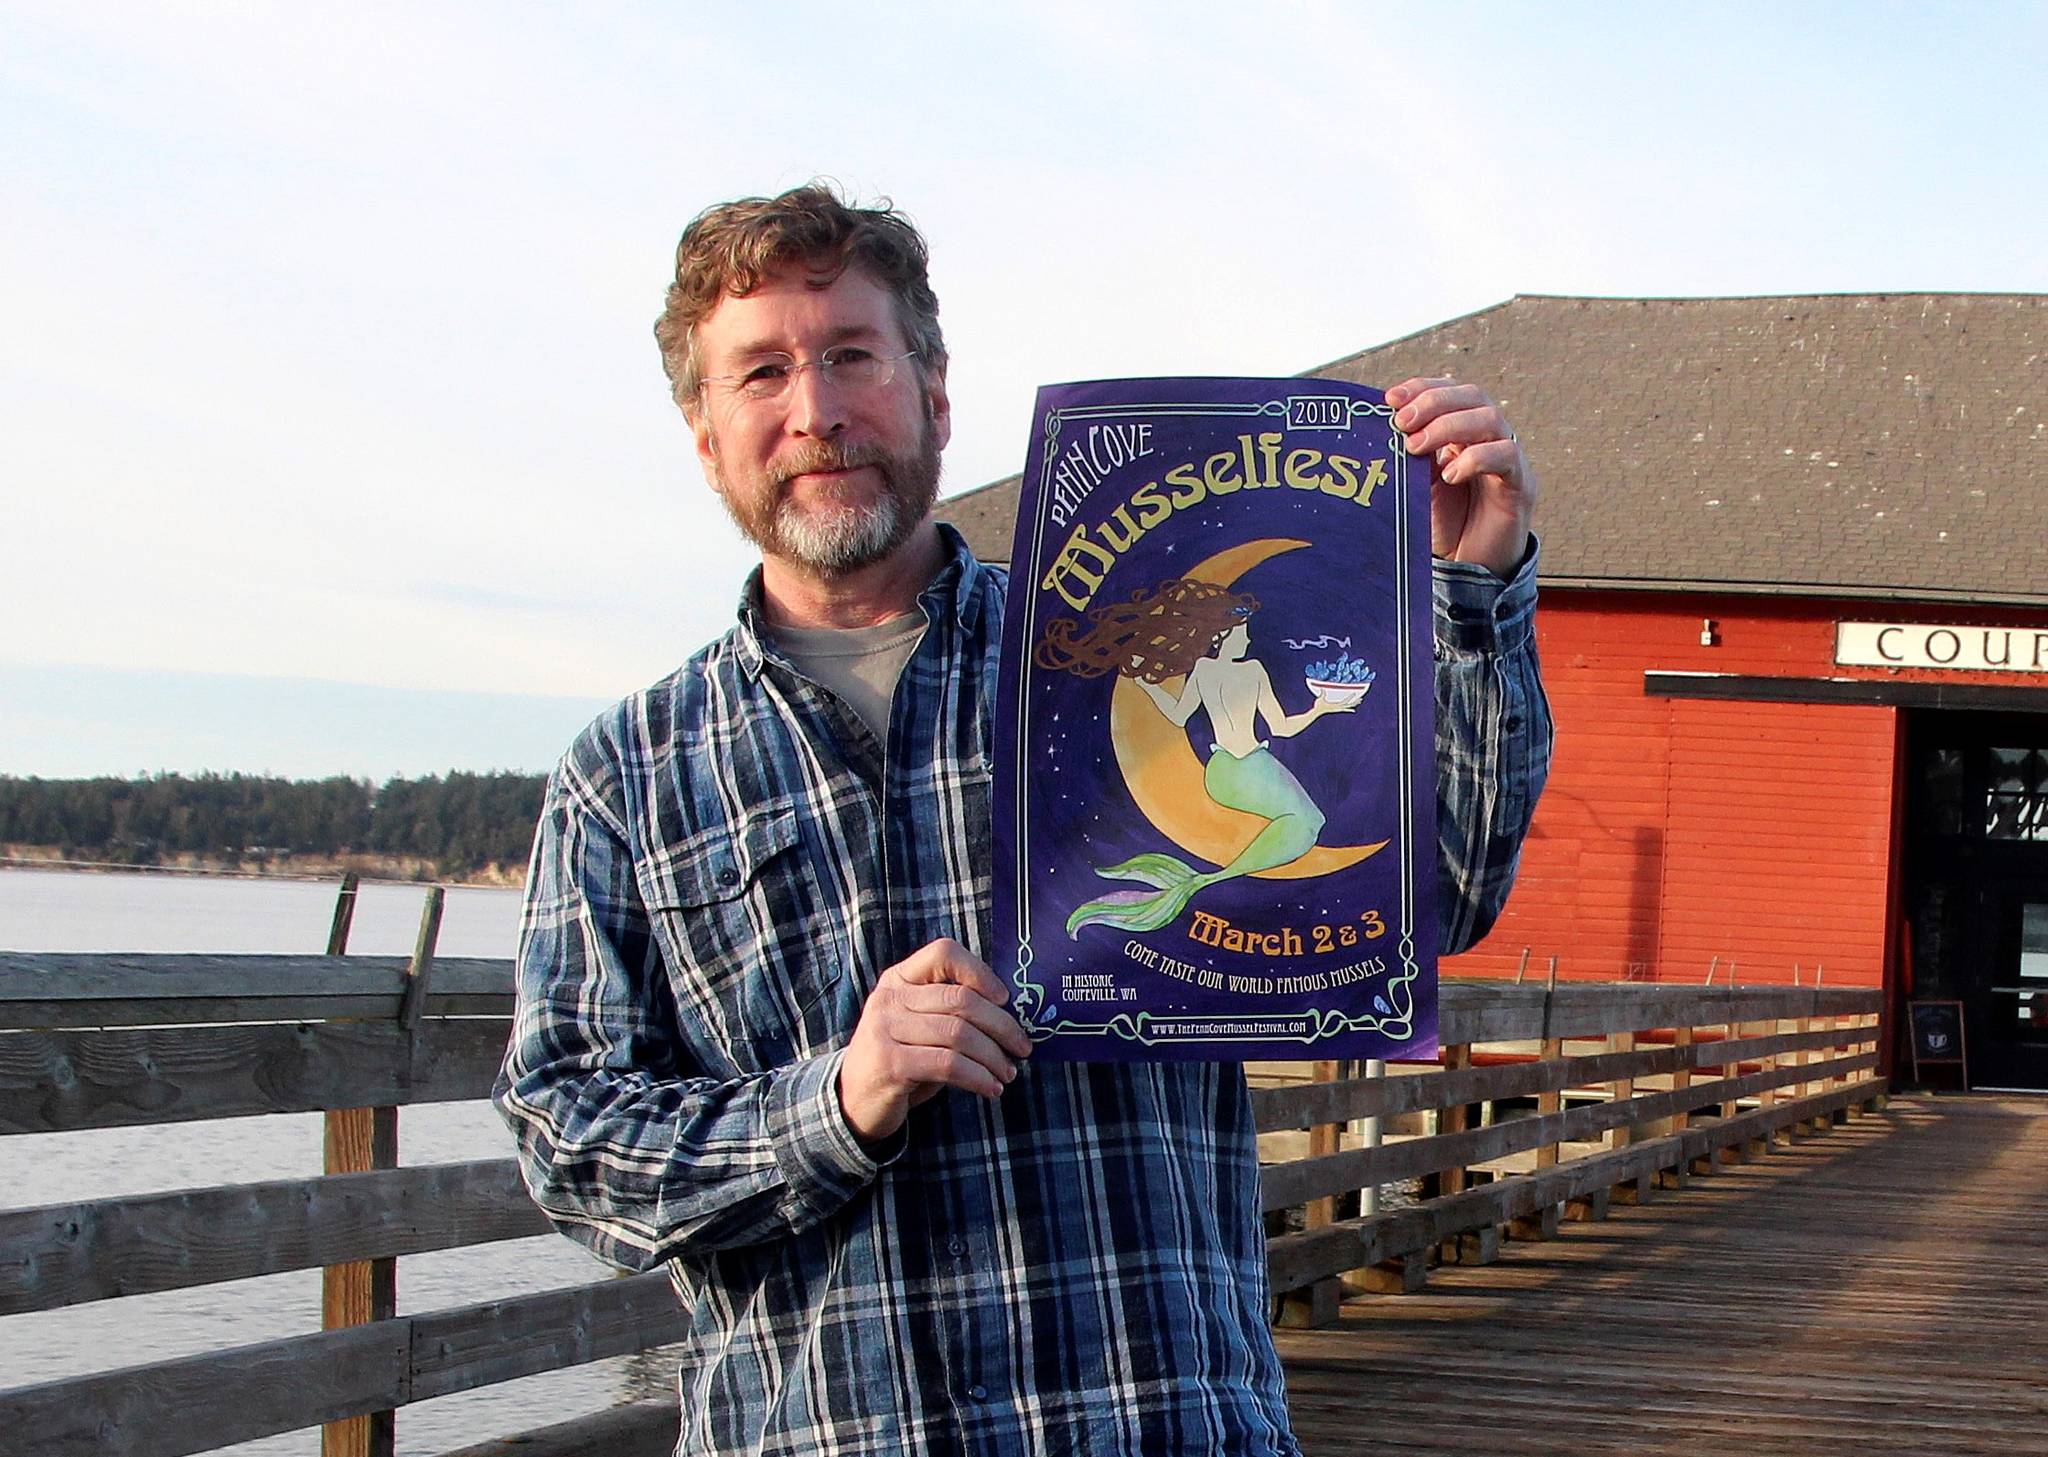 Over the moon: Musselfest launches events season